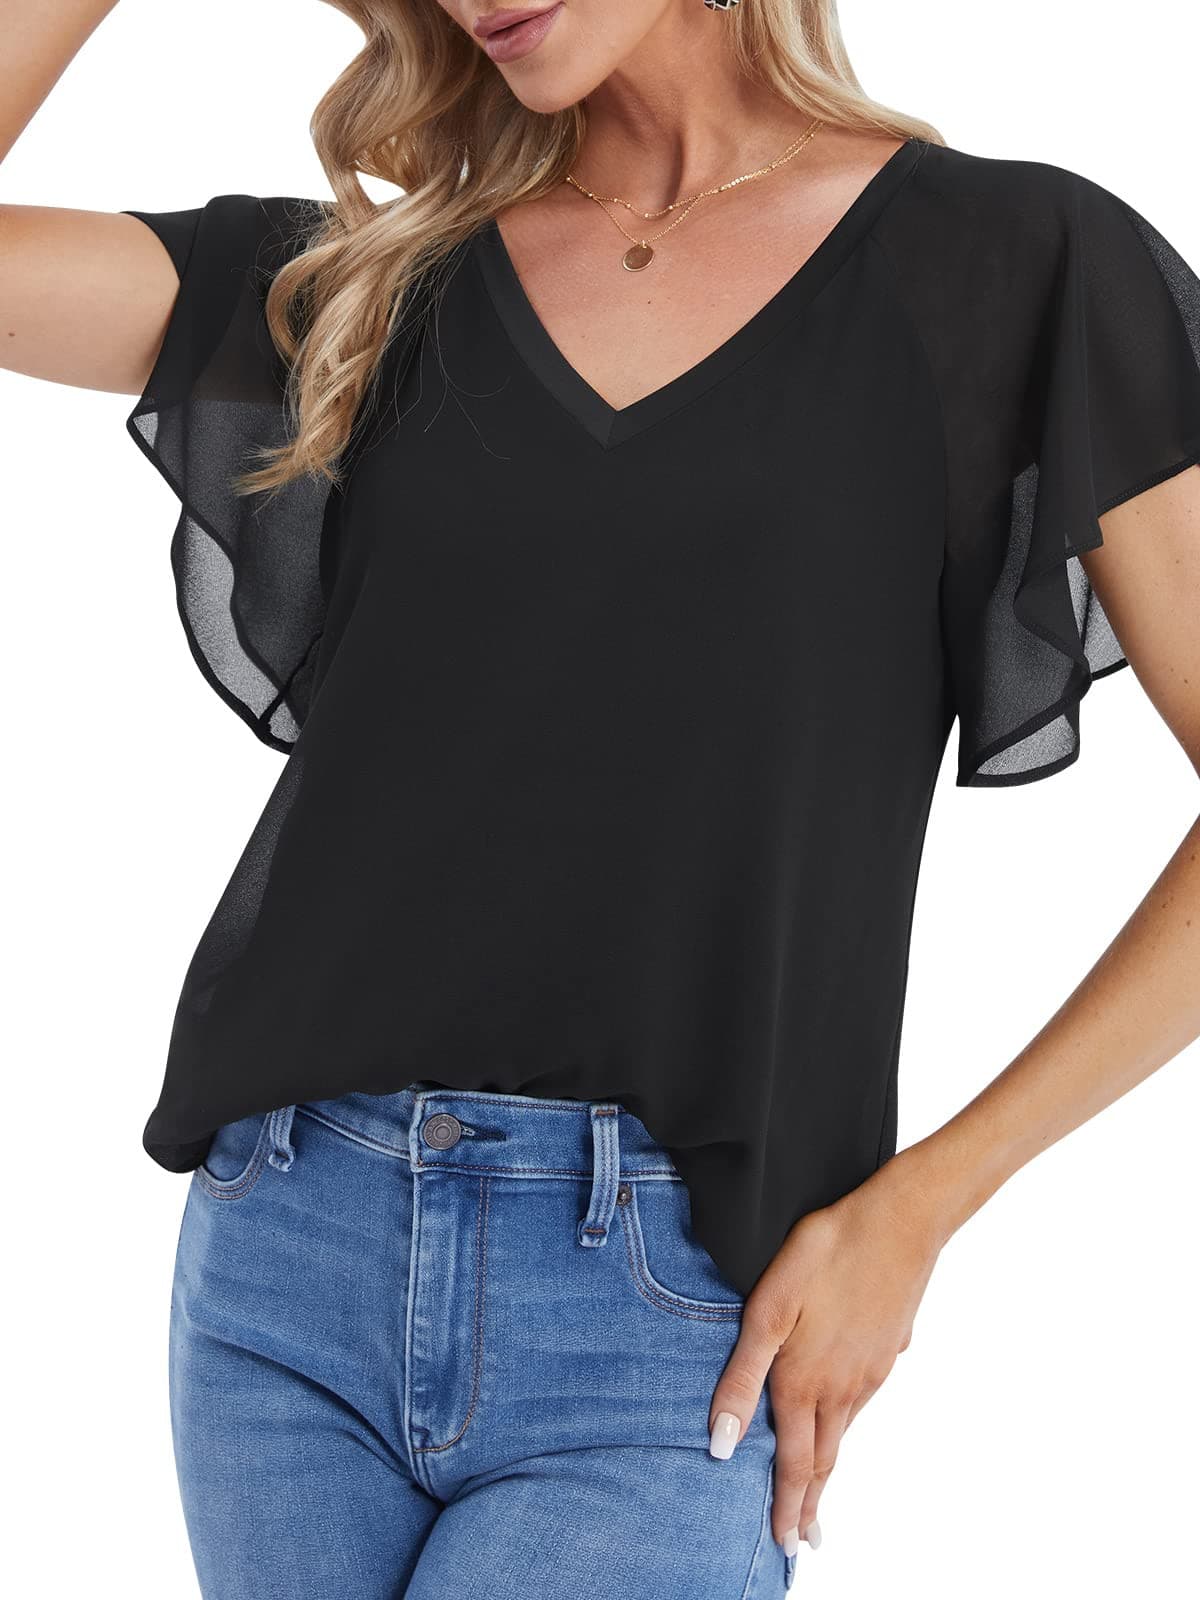 DJT Flare Ruffle Solid Black Womens Summer Chiffon Tops Casual V Neck Short Sleeve Flowy Top Blouses Shirts